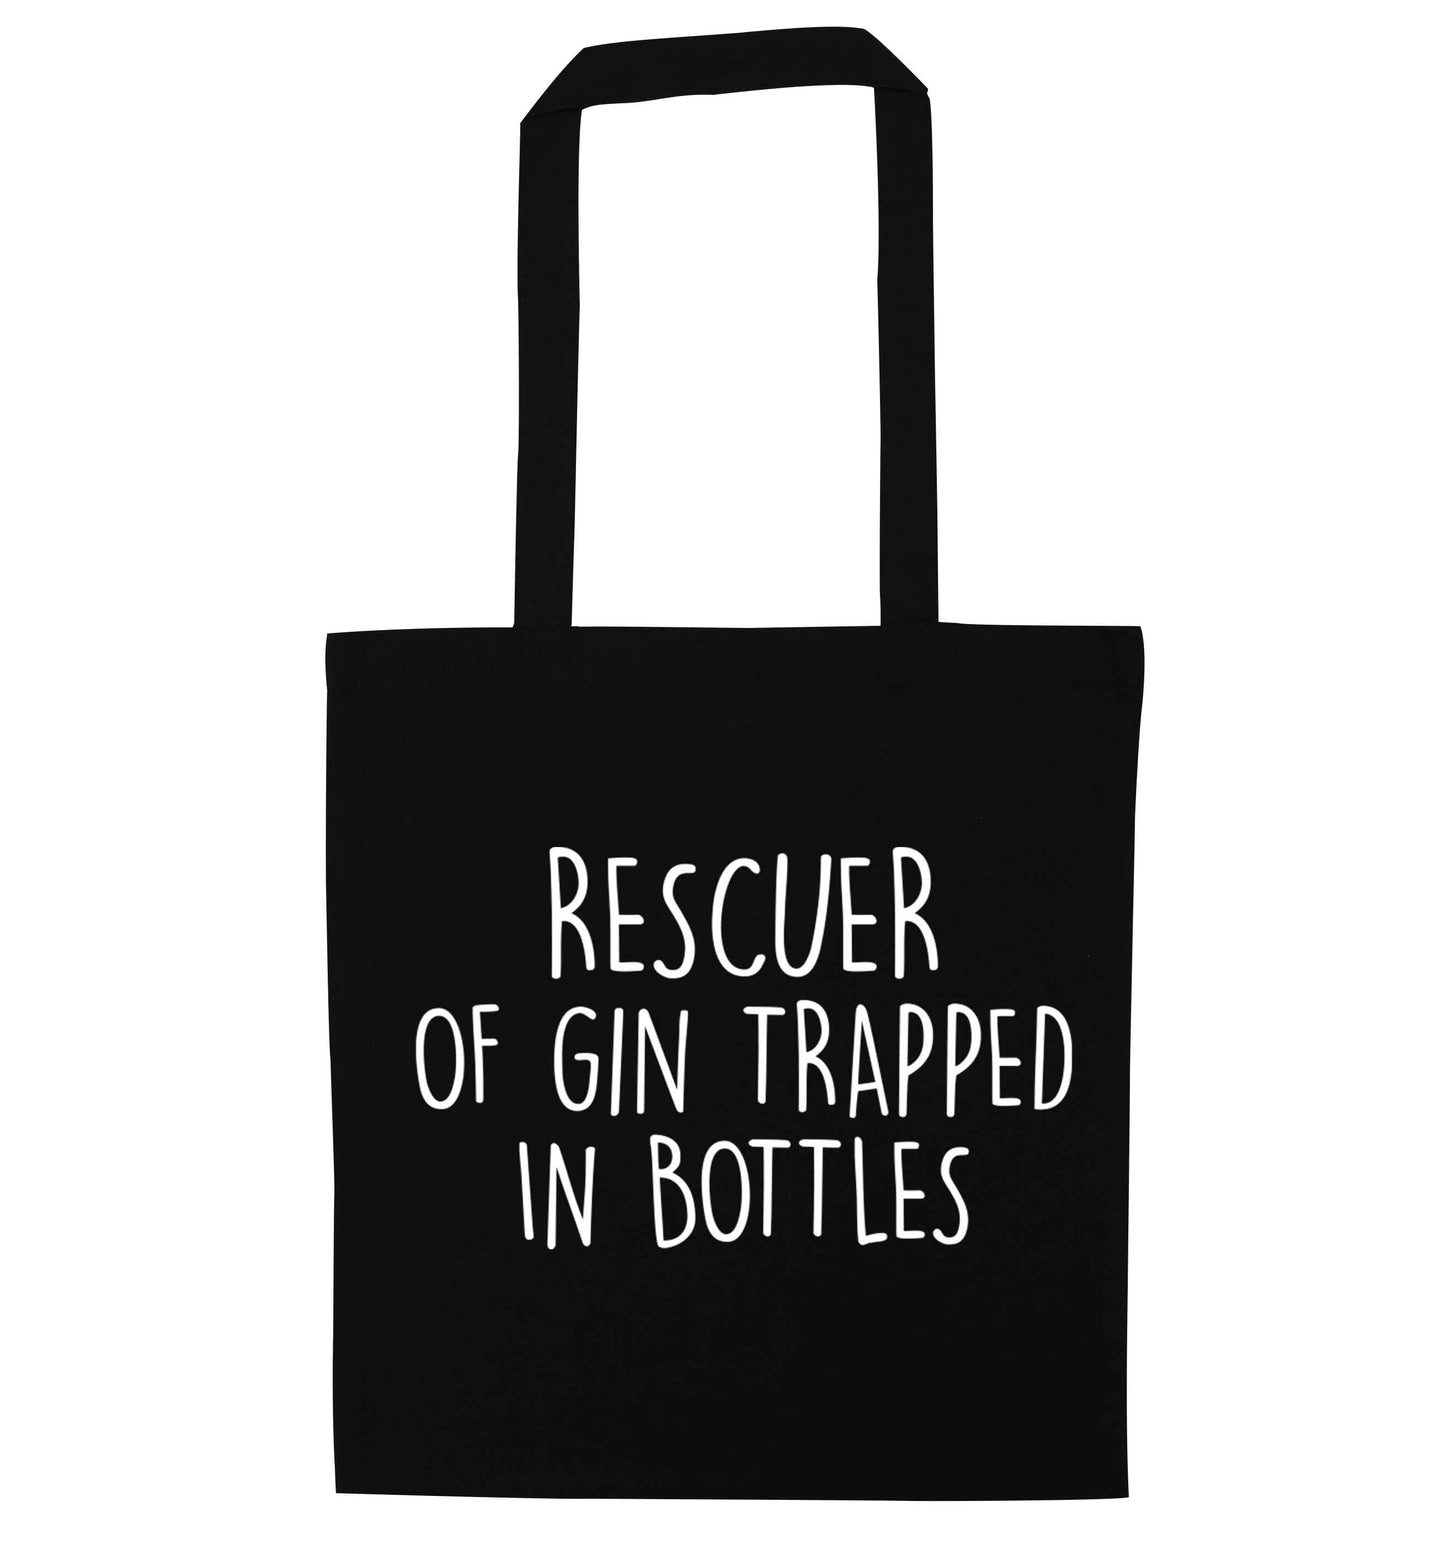 Rescuer of gin trapped in bottles black tote bag